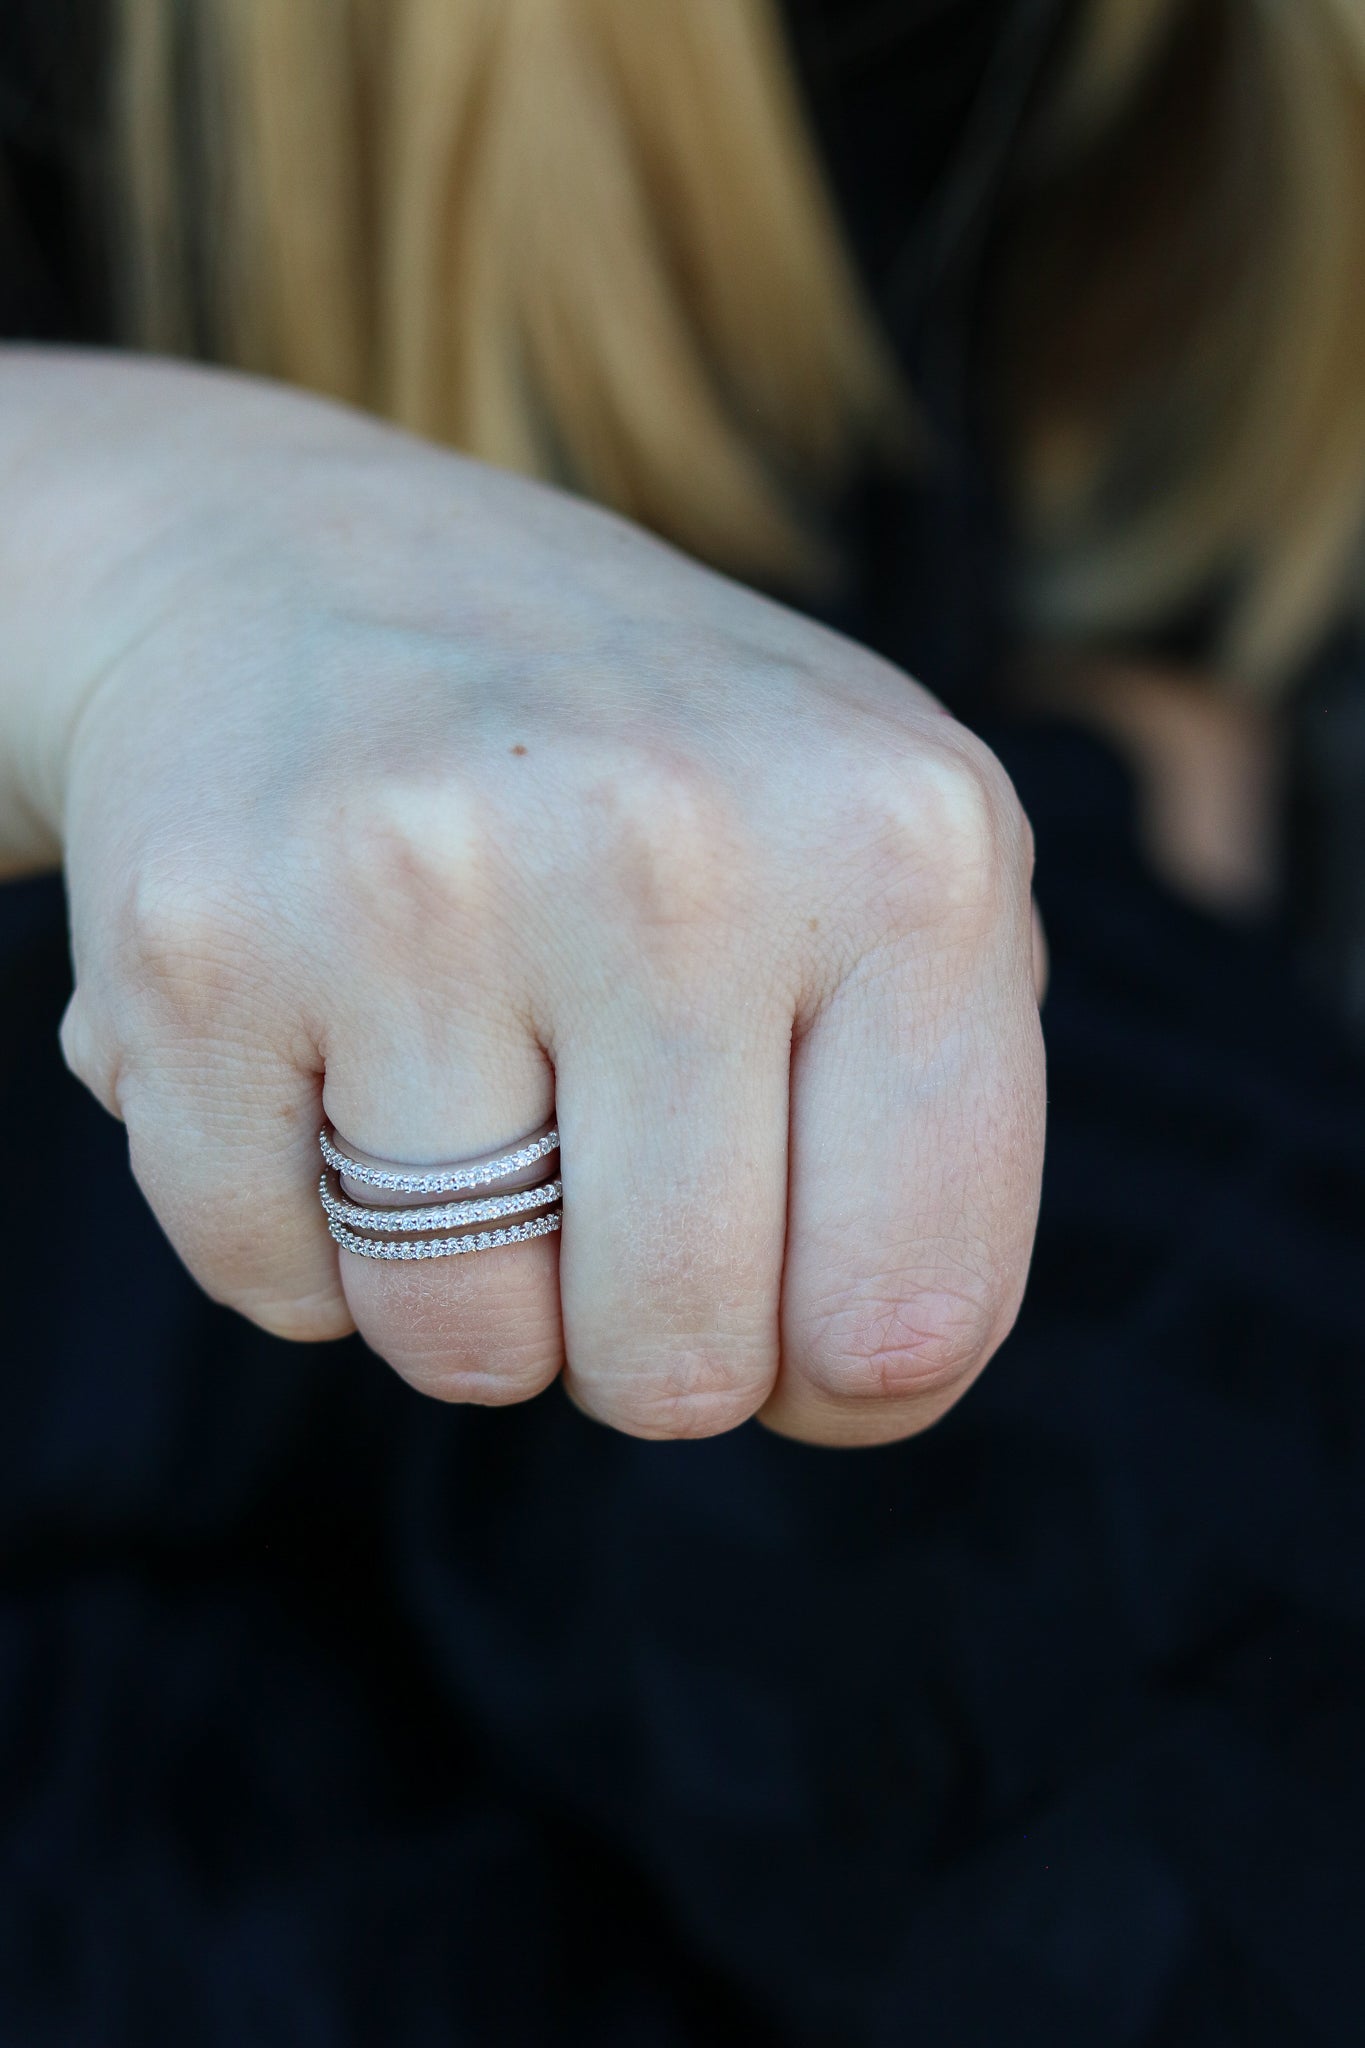 Triple Stackable Ring